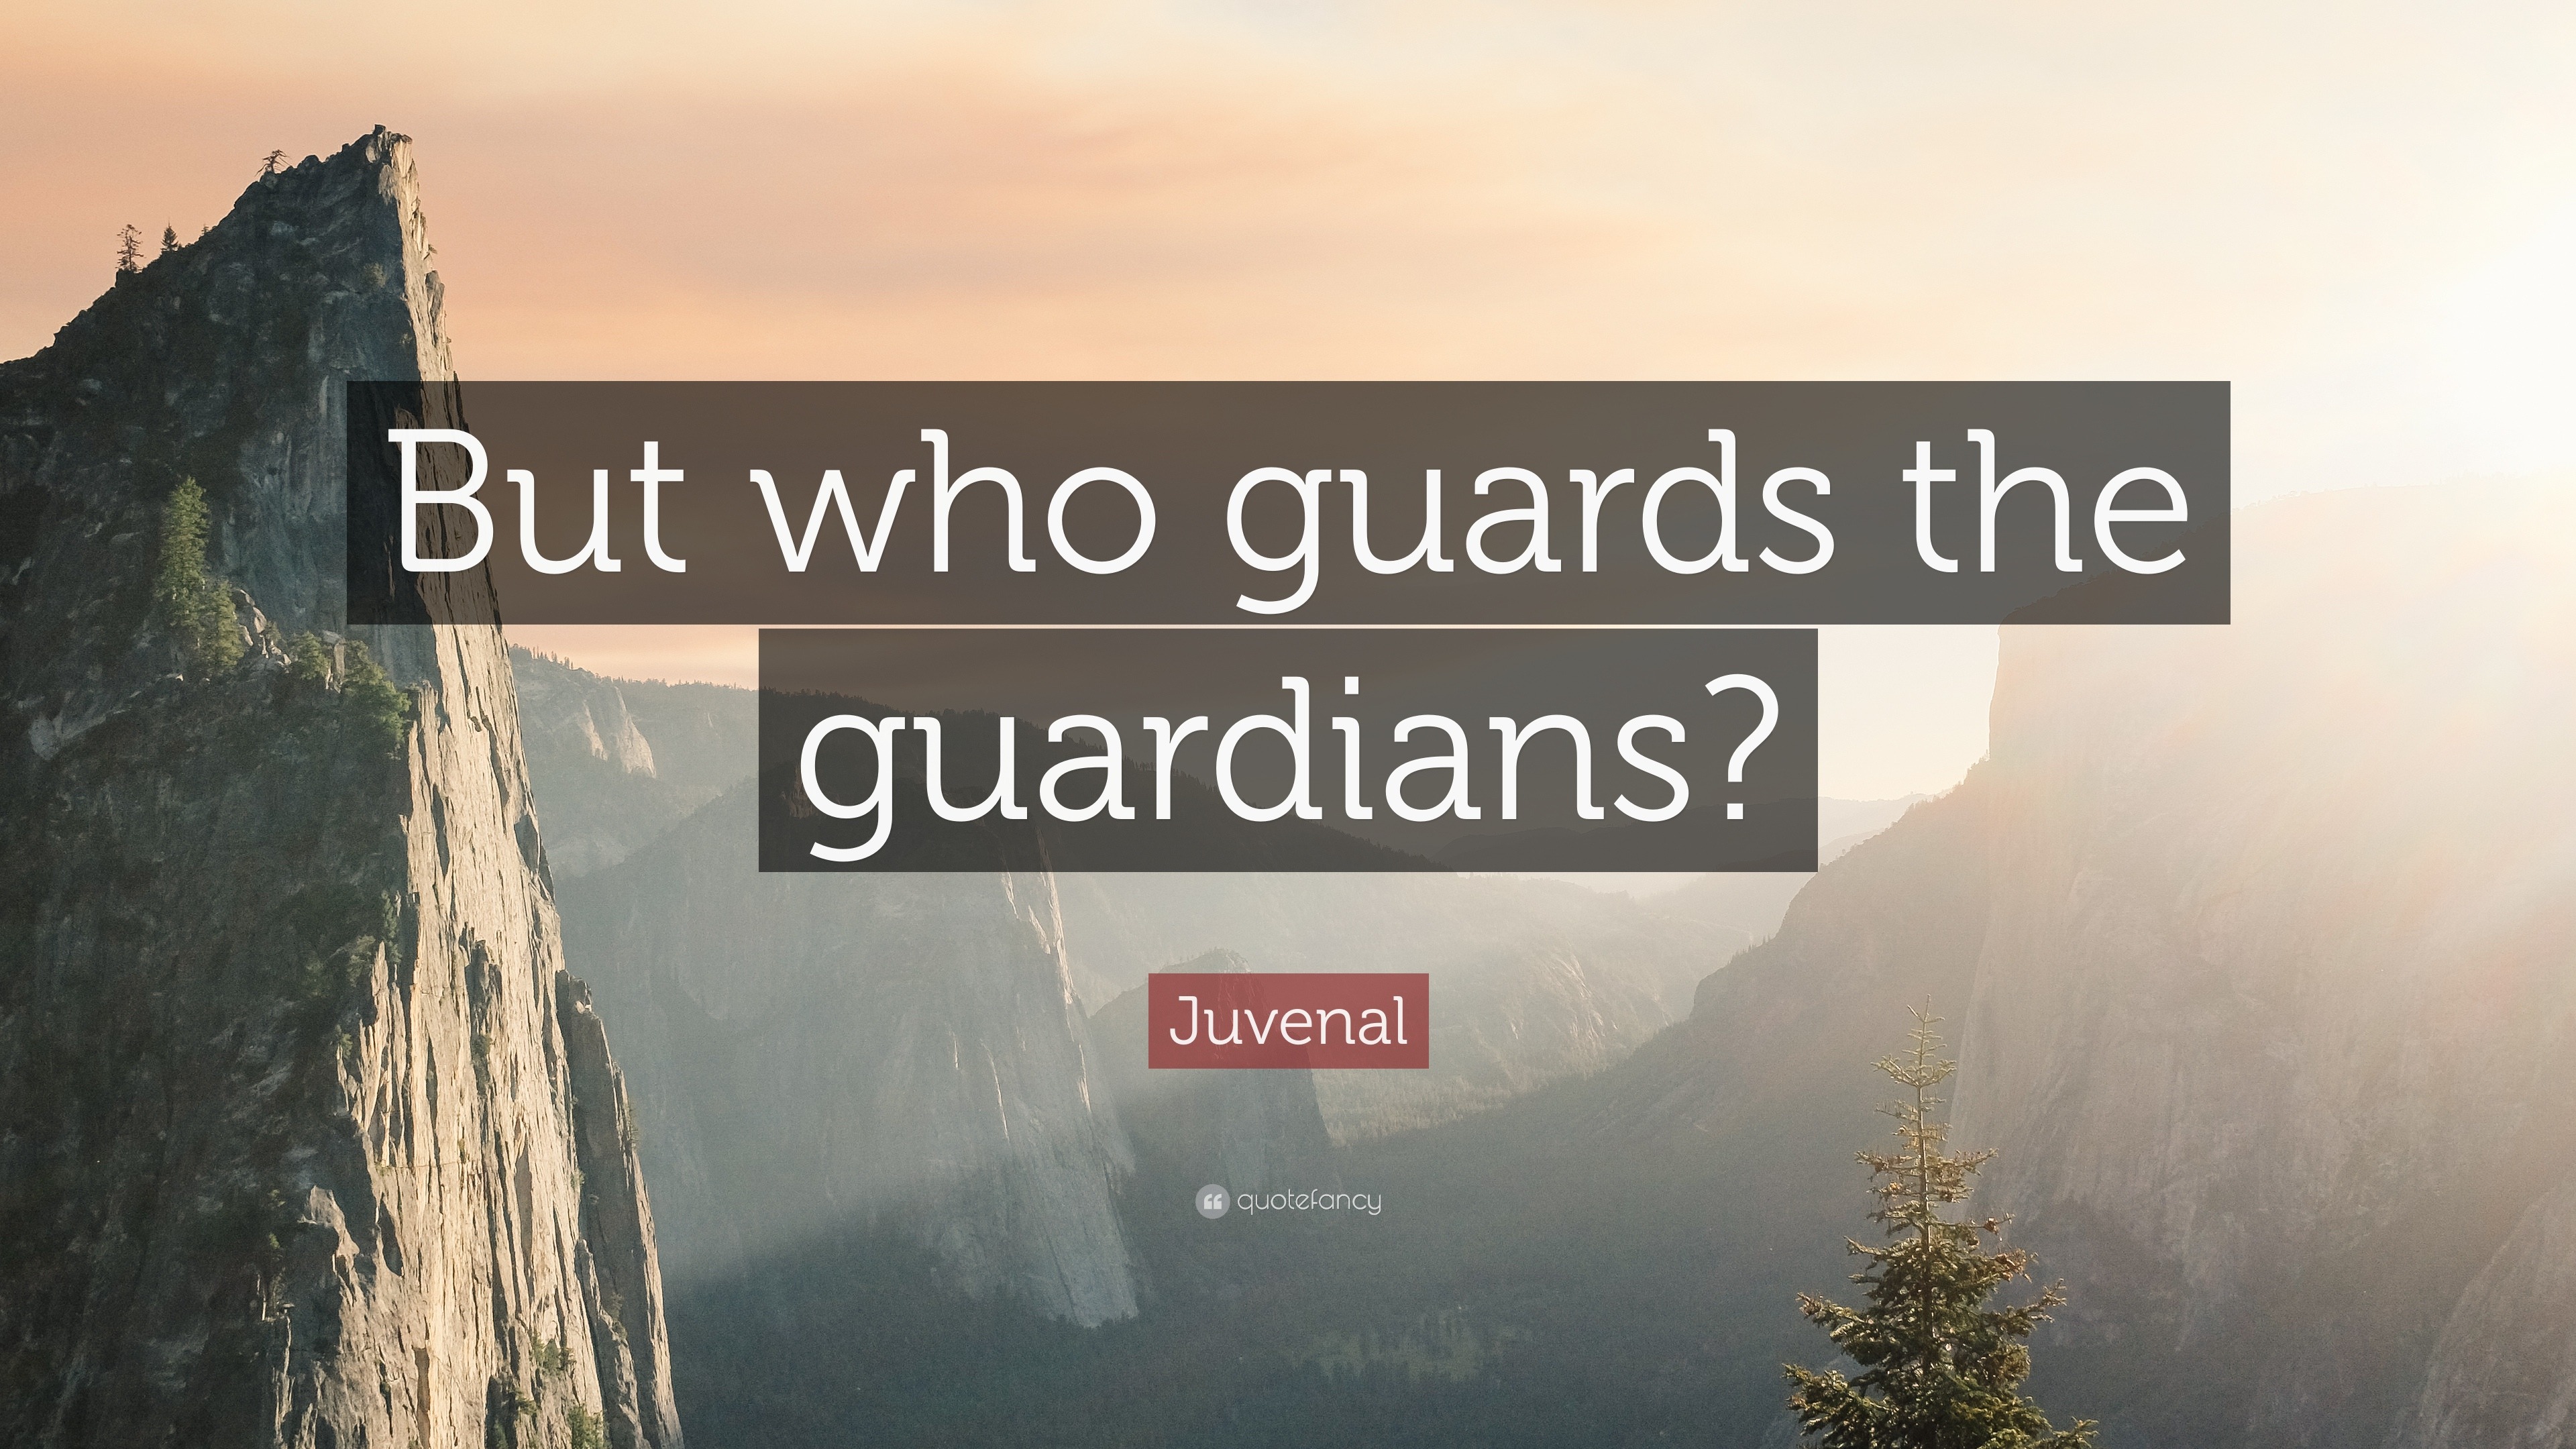 Juvenal Quote: “But who guards the guardians?”